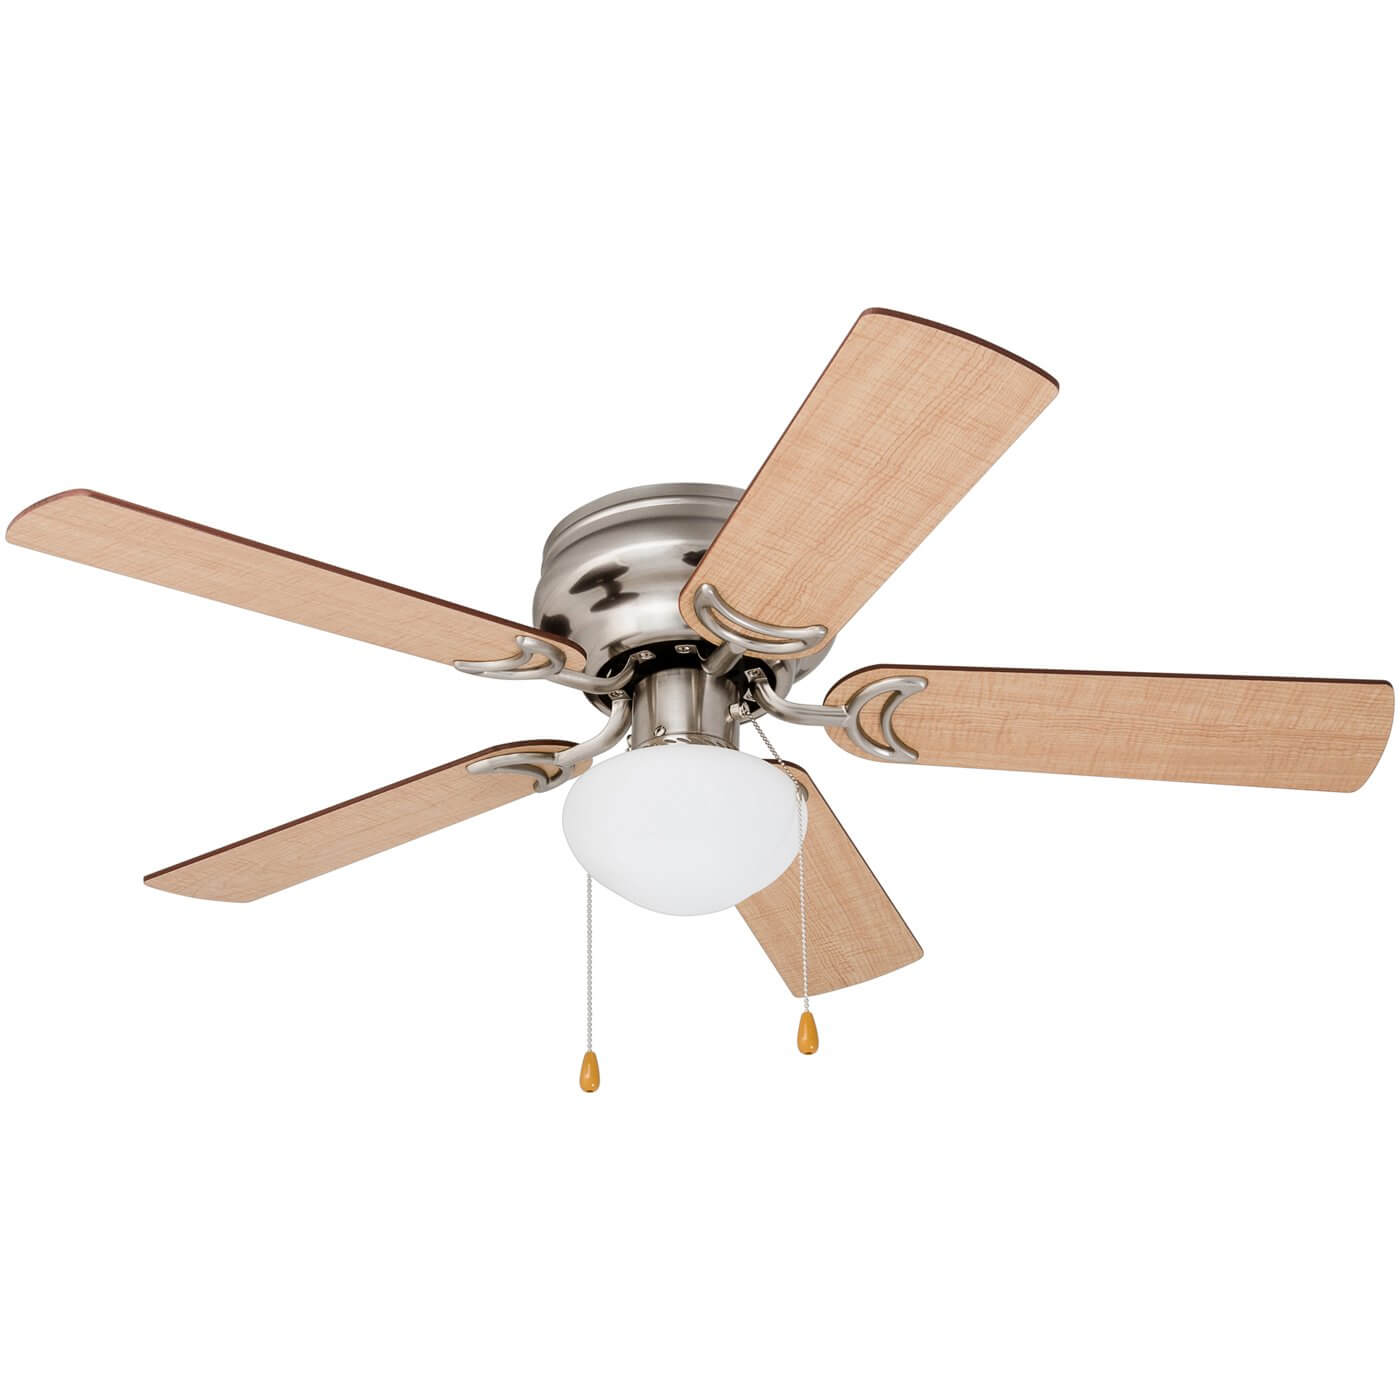 42 Inch Alvina, Satin Nickel, Pull Chain, Ceiling Fan by Prominence Home